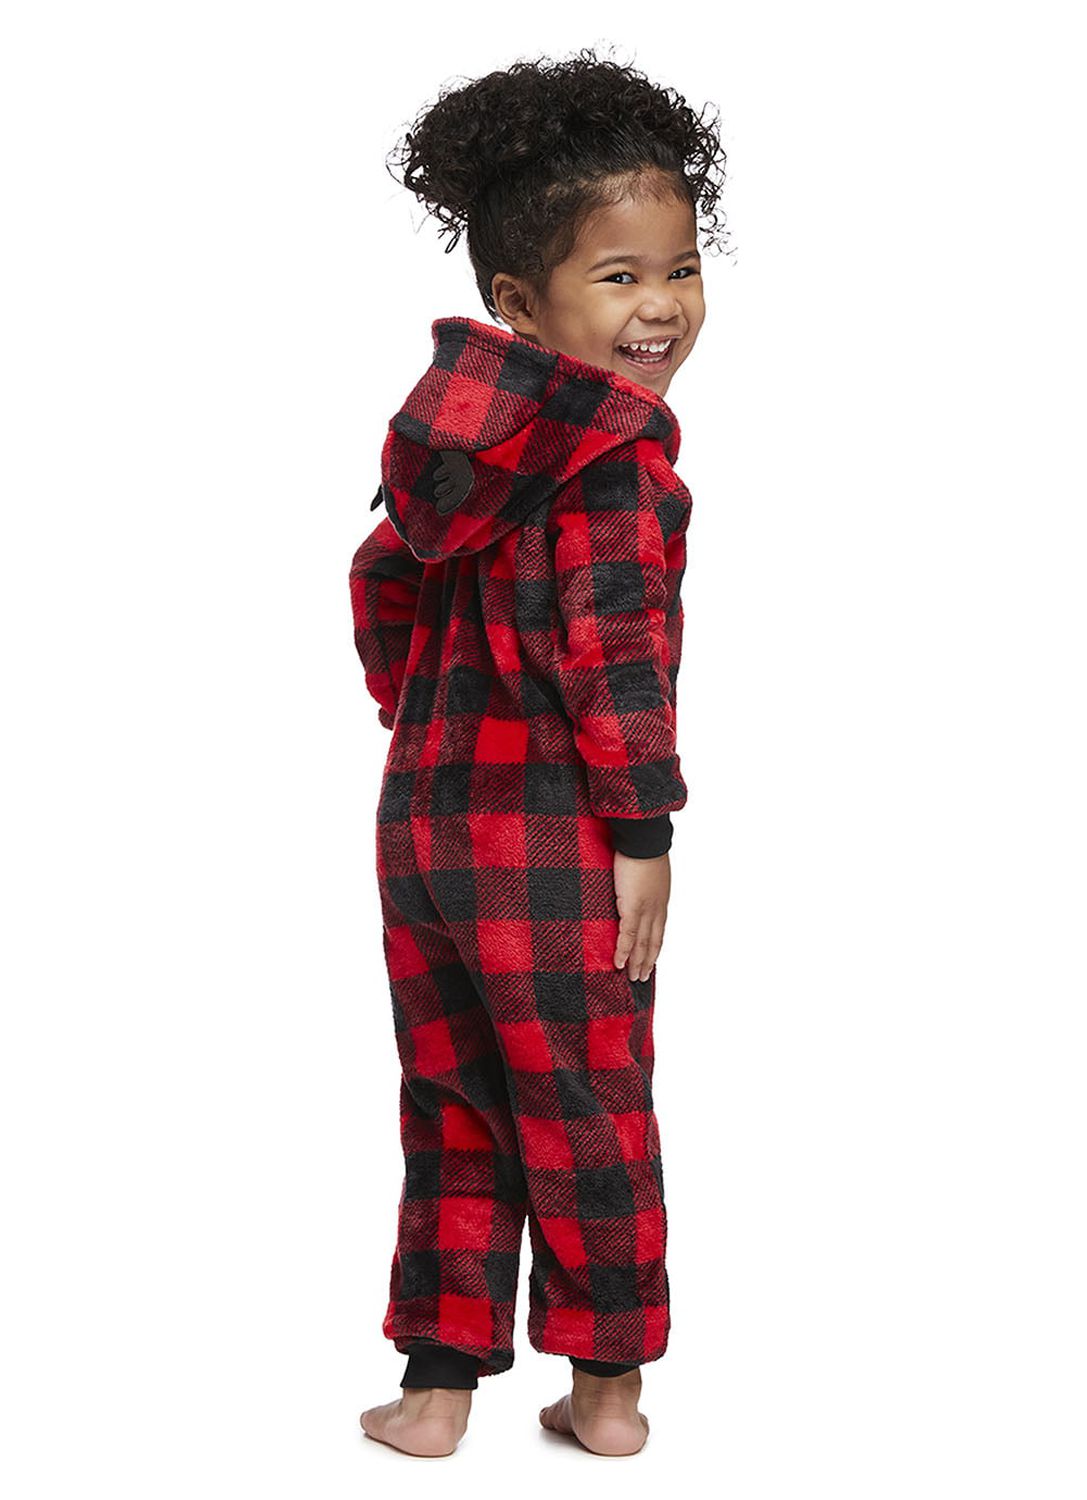 Jolly Jammies Toddler Buffalo Plaid Matching Family Pajamas Union Suit, Sizes 2T-5T - image 4 of 10